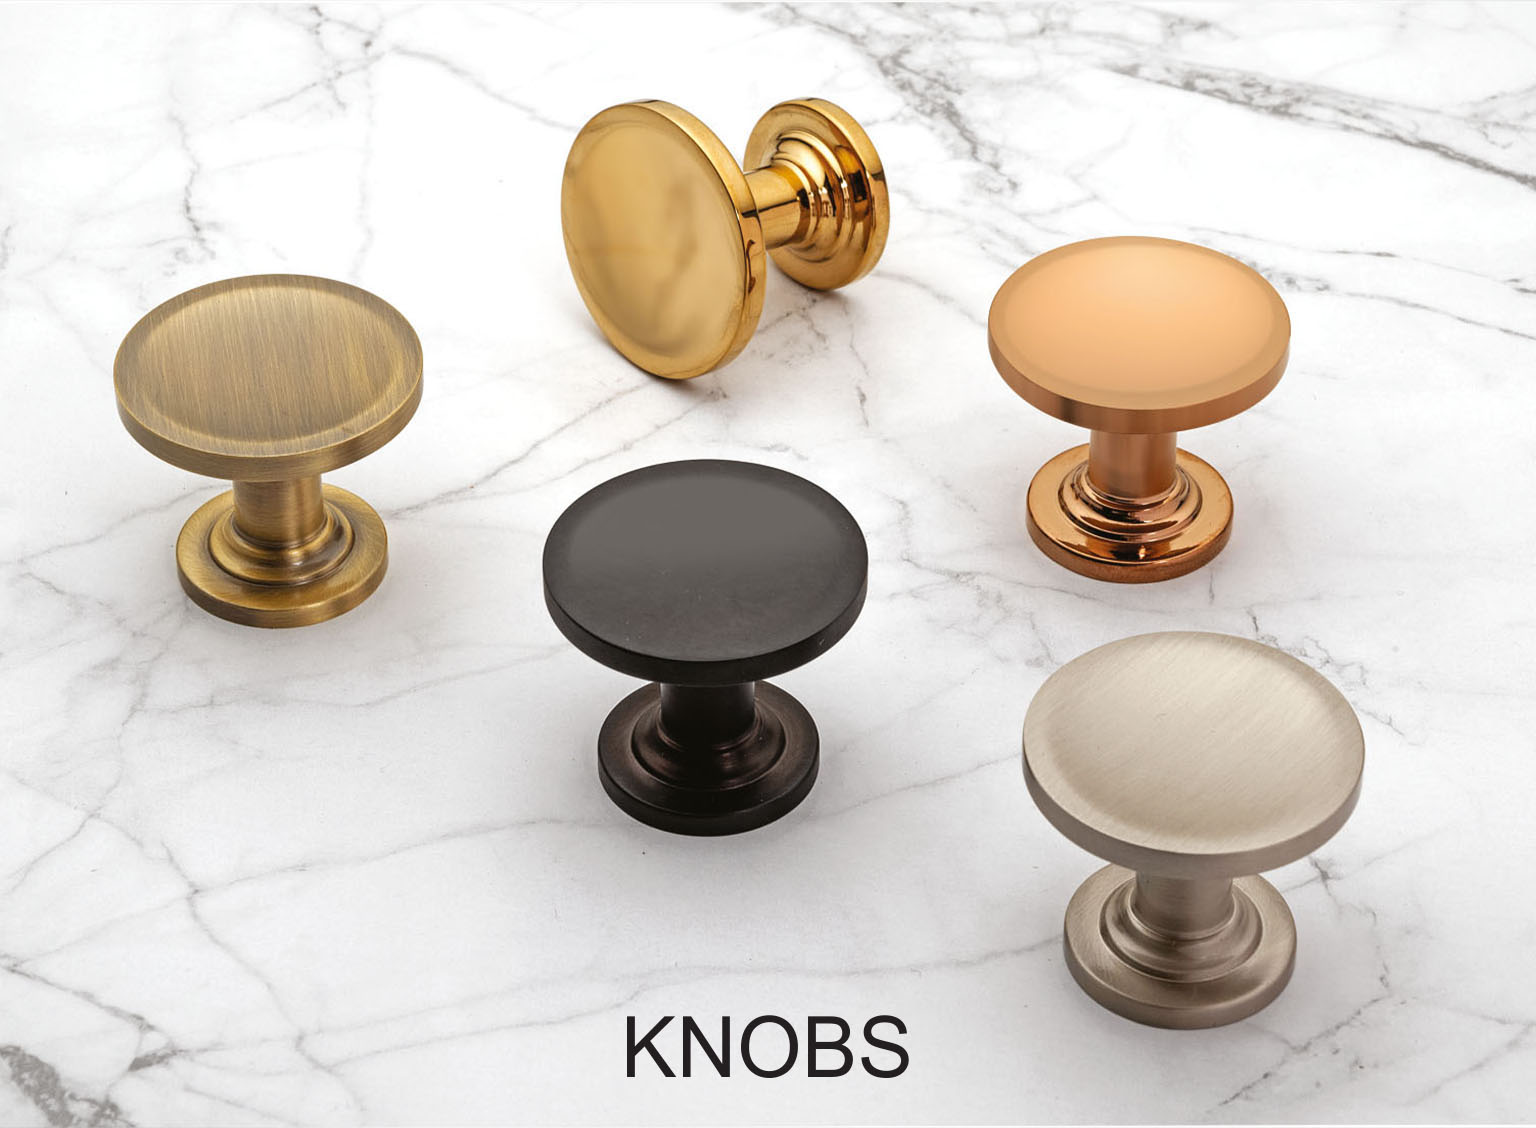 Cabinet Pulls, Knobs and Wardrobe Pulls by Decor Brass Pull Product